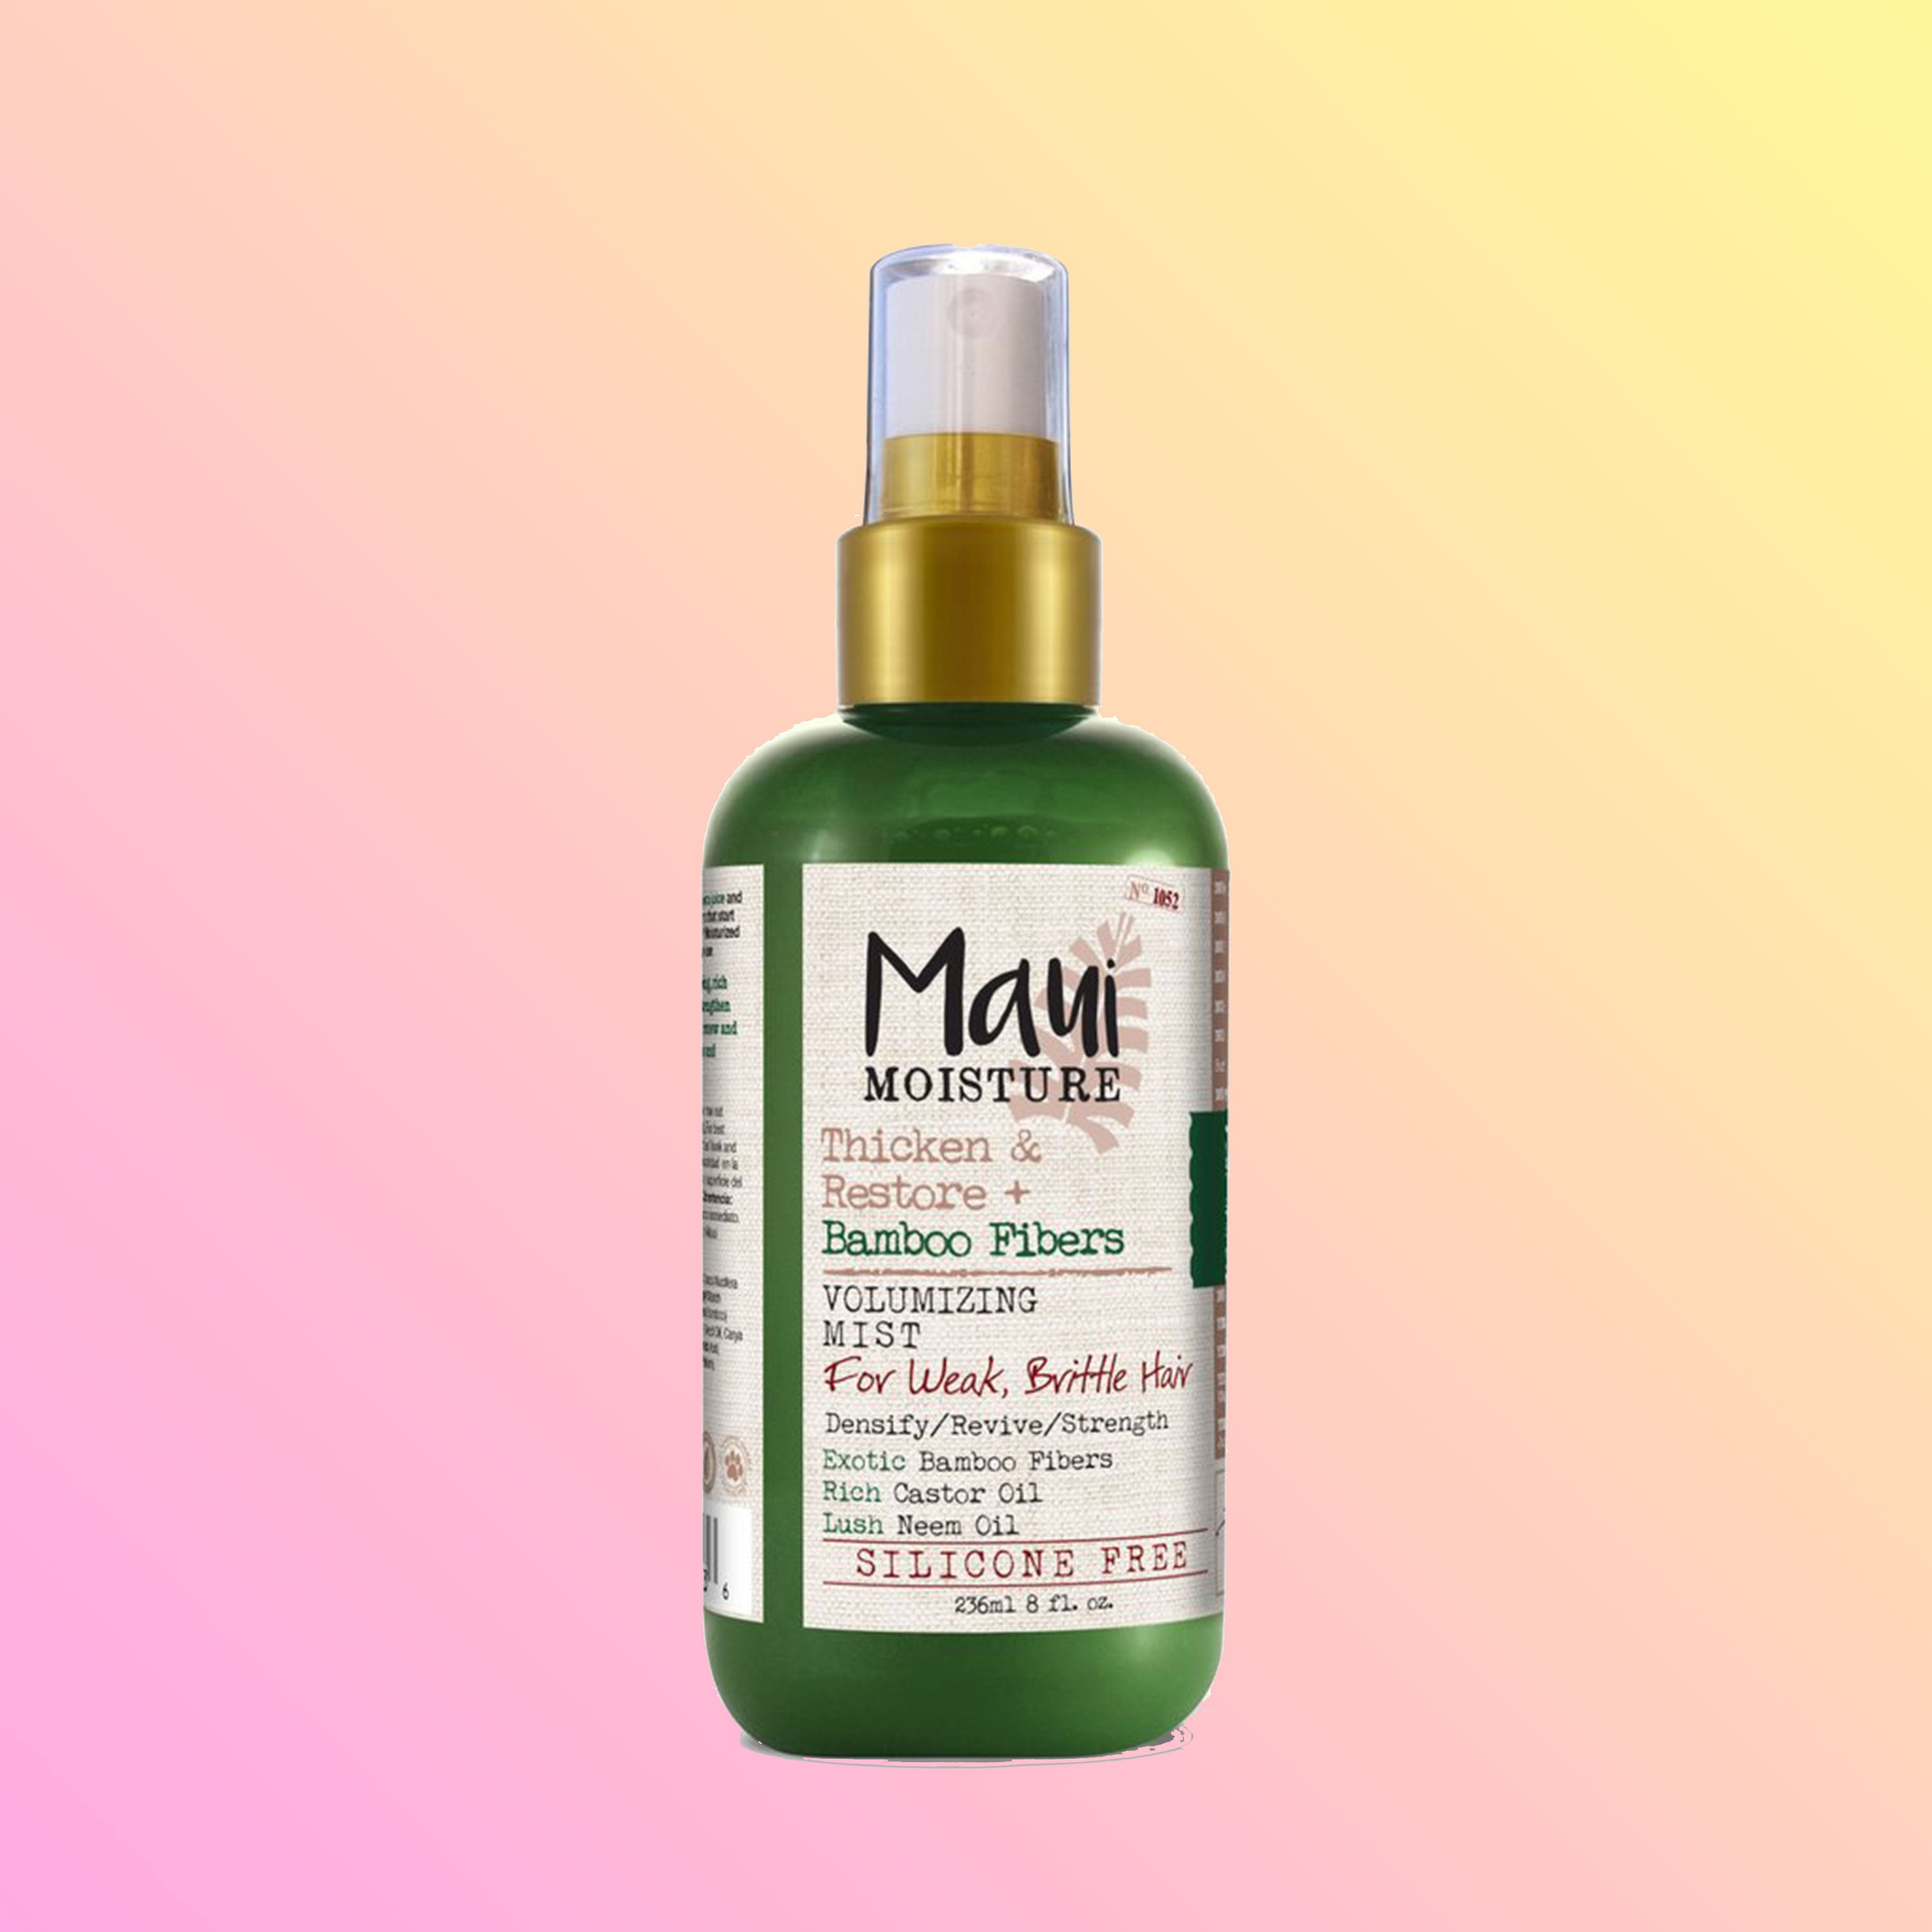 7 Castor Oil-Infused Products To Try If You're Obsessed With Hair Growth
